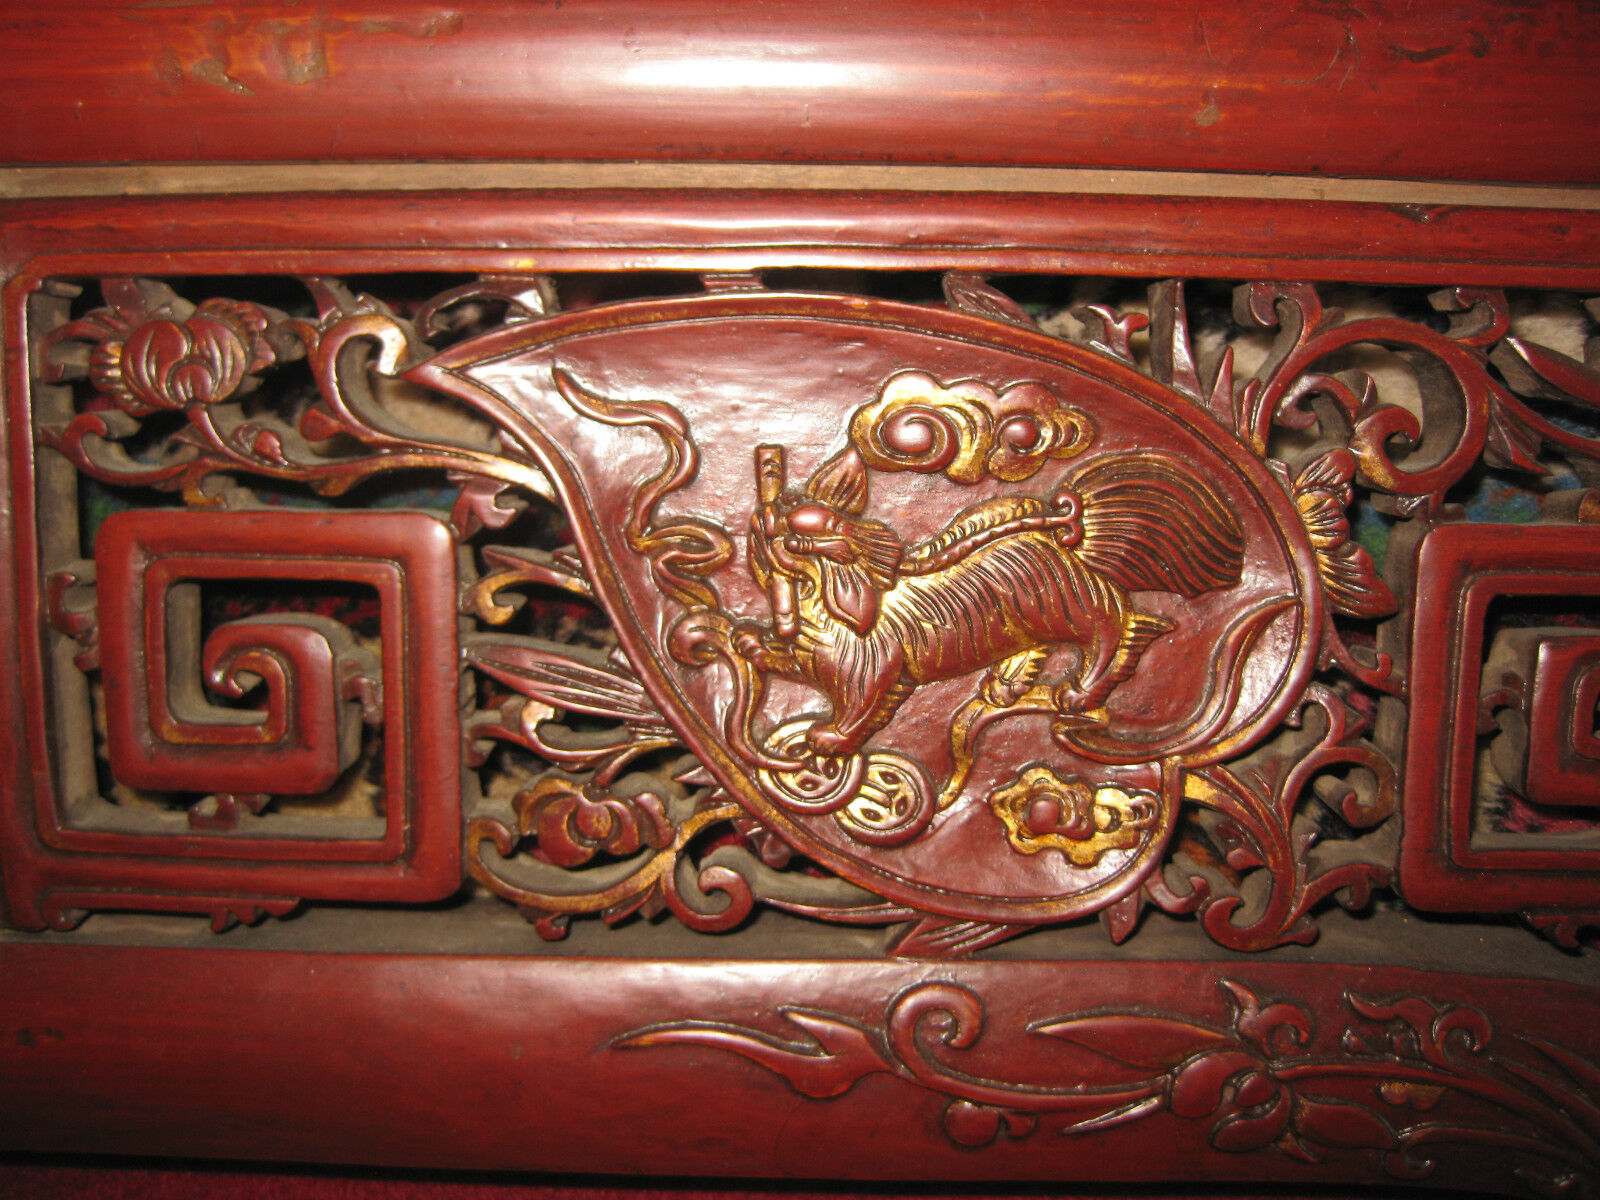 Chinese antique carved wood canope of opium or wedding  bed, Qing dynasty Без бренда - фотография #8